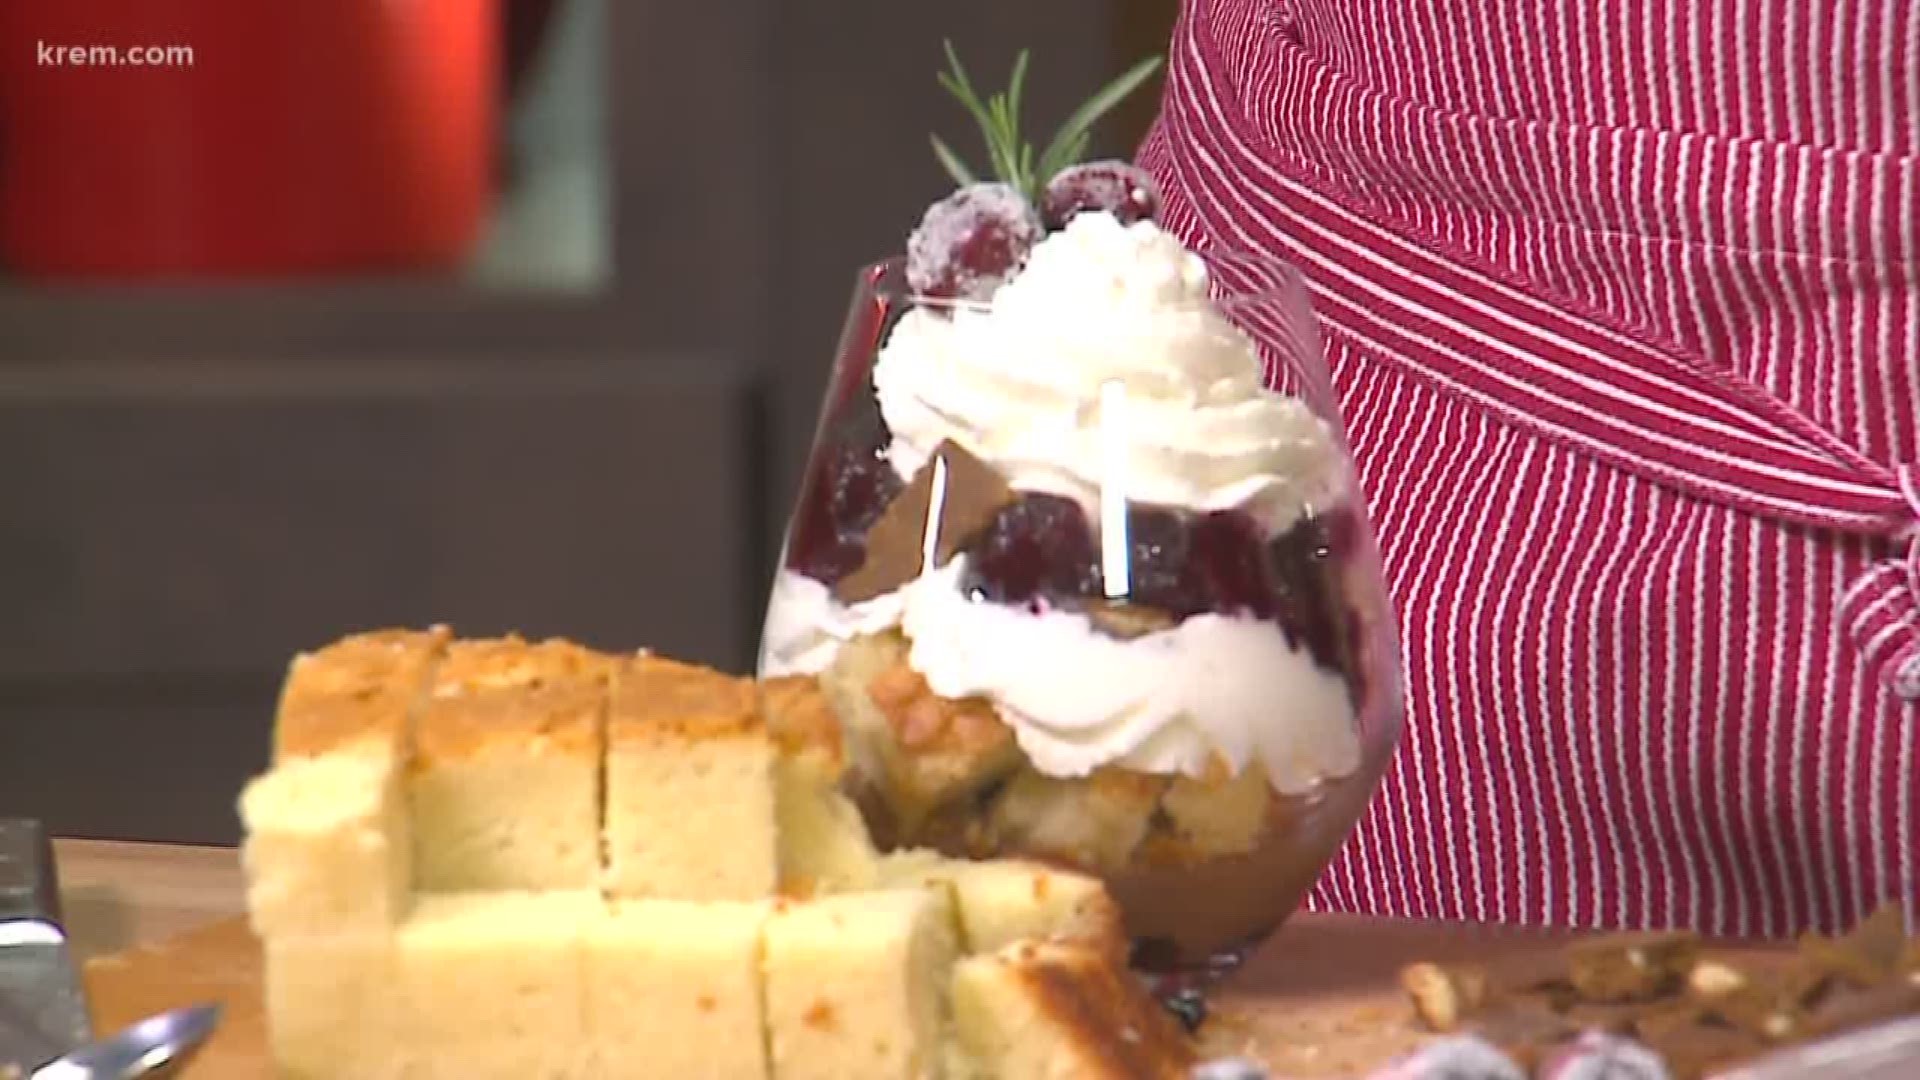 KREM's Amanda Roley is in our kitchen with Ricky Webster, winner of Hallmark Drama's Christmas Cookie Matchup, to get some ideas for last-minute holiday desserts.